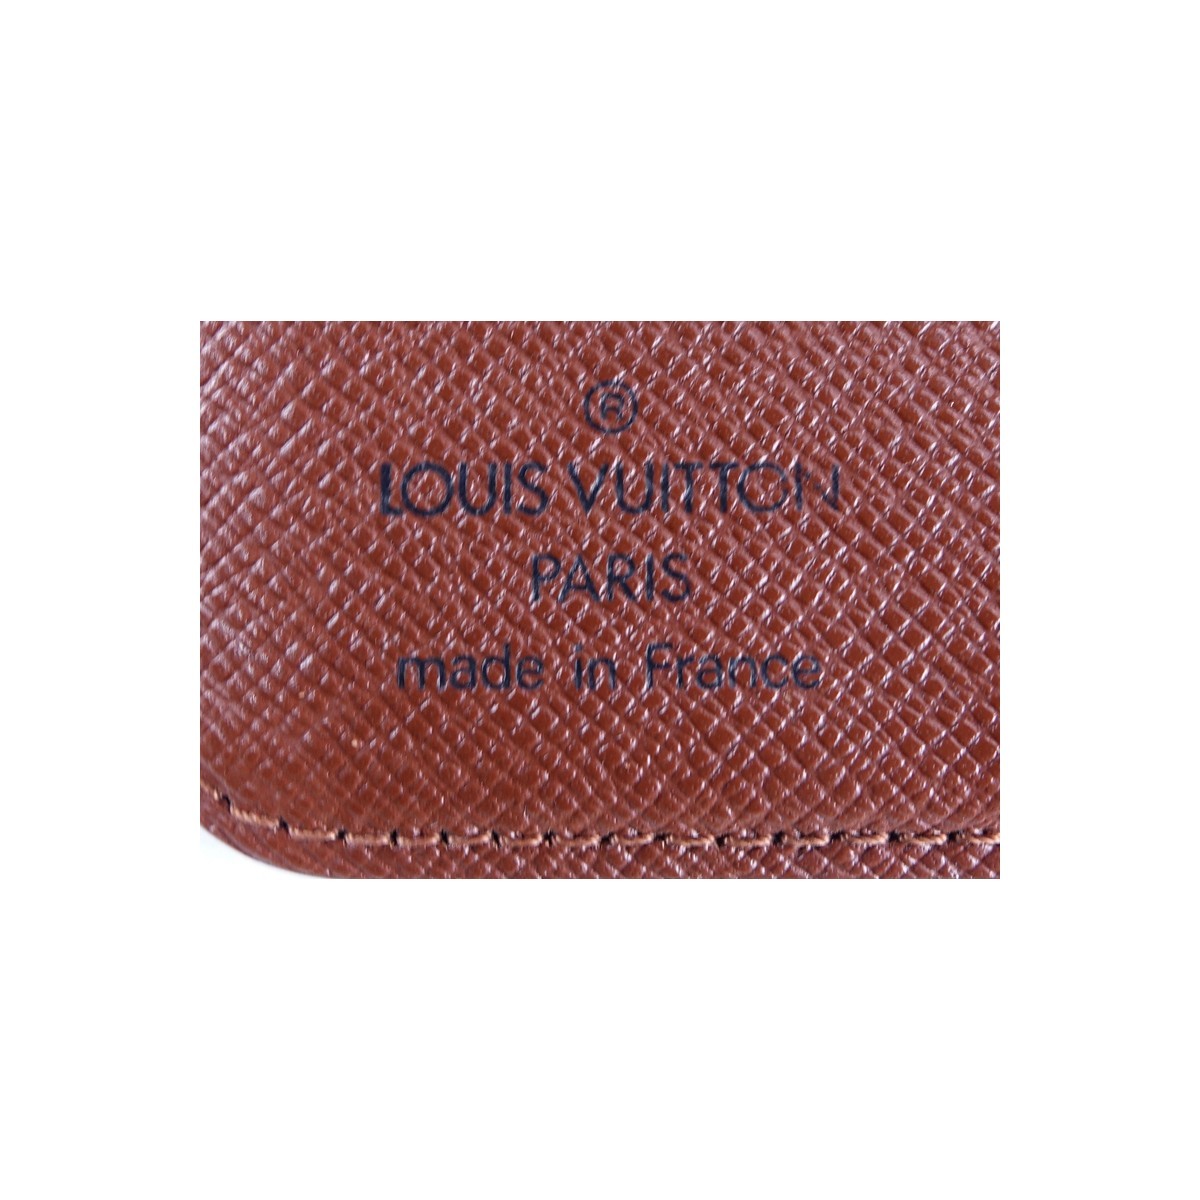 Louis Vuitton Brown Monogram Coated Canvas Compact Zip Wallet. Golden brass hardware, brown interior with zipper and slot pockets.